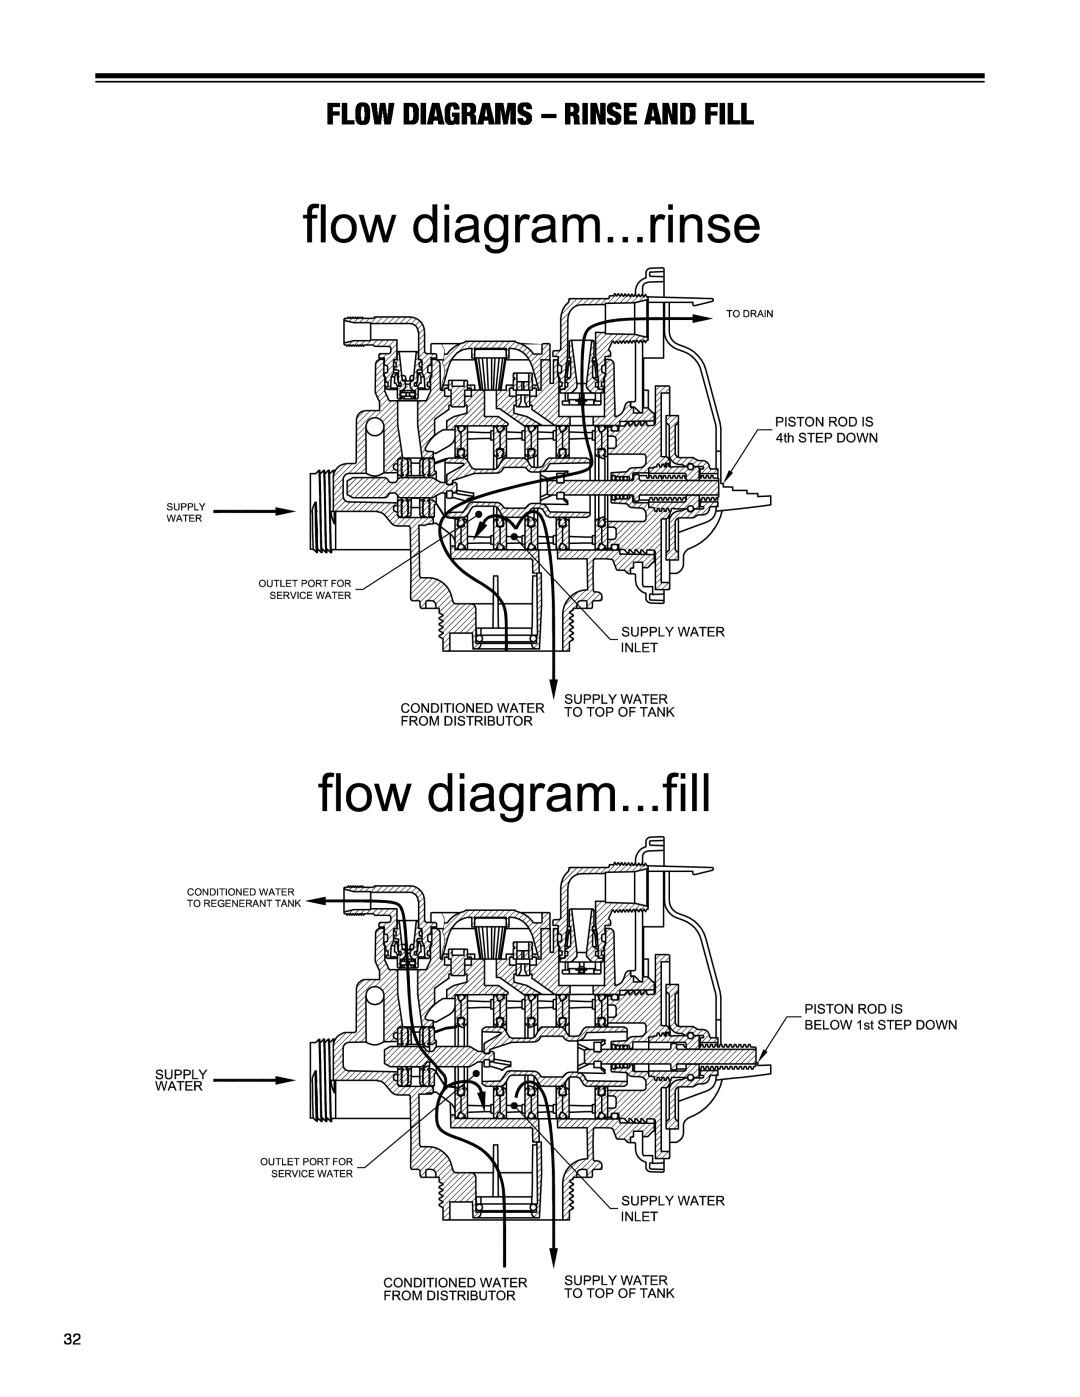 Argosy Research H-125 Series owner manual Flow Diagrams - Rinse And Fill 